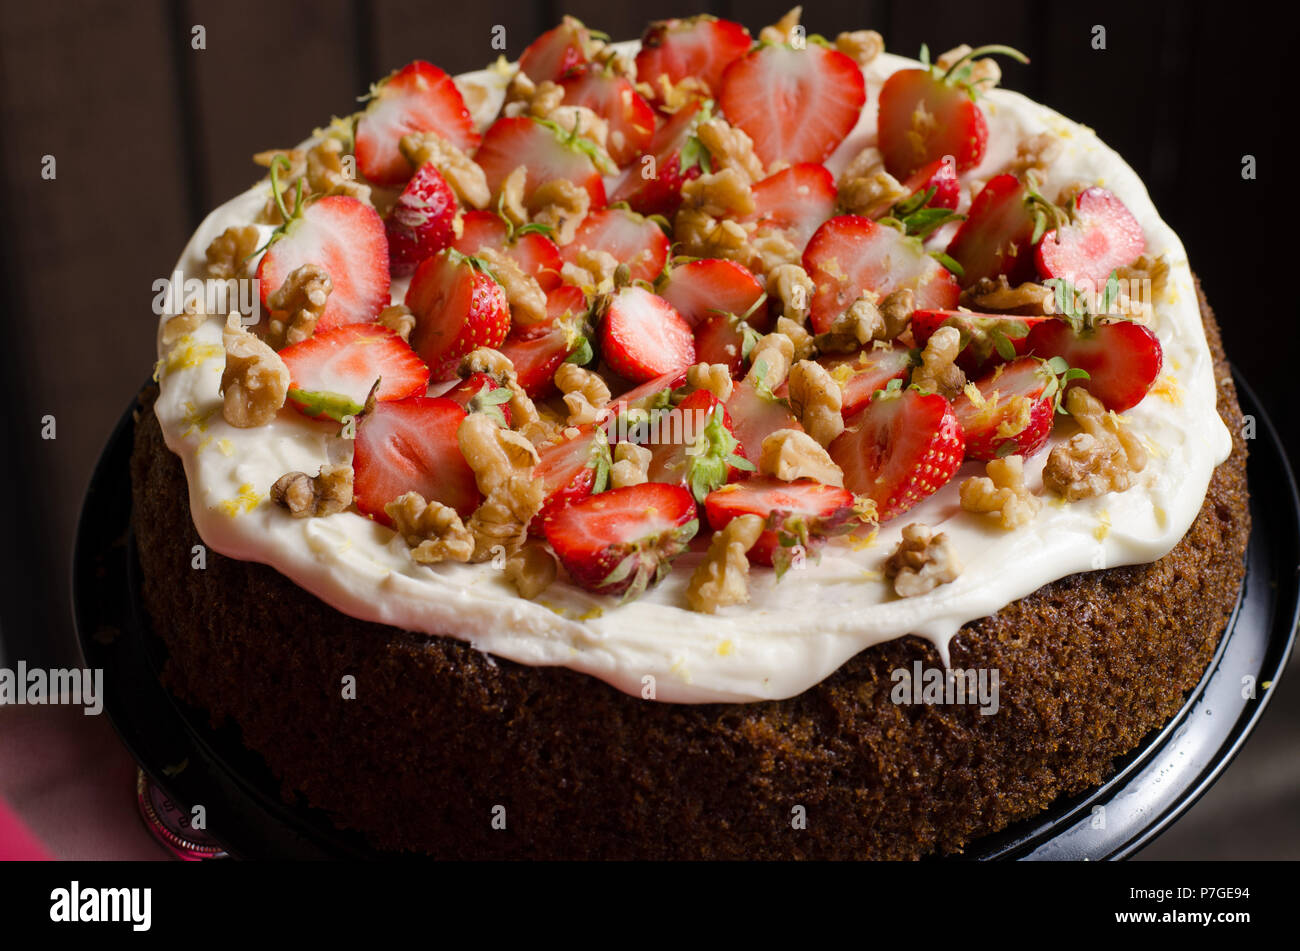 A carrotcake decorated with fresh strawberries and walnuts on top of a frosting of cream cheese, icing sugar and lemon. Stock Photo